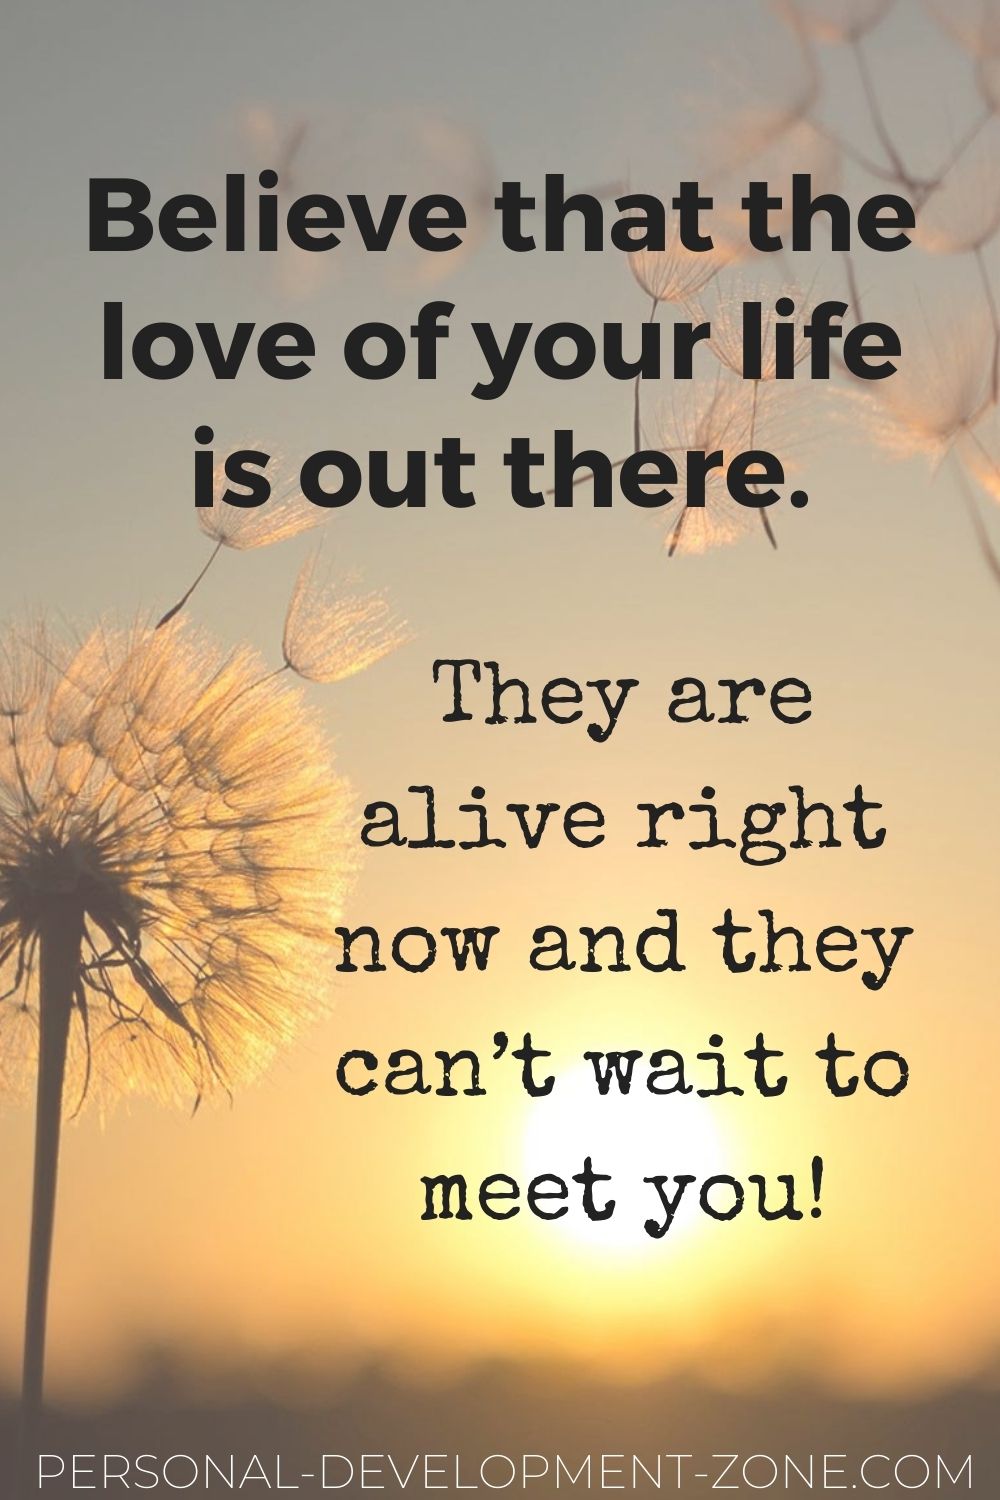 dating quotes believe that the love of your life is out there they are alive right now and they can't wait to meet you